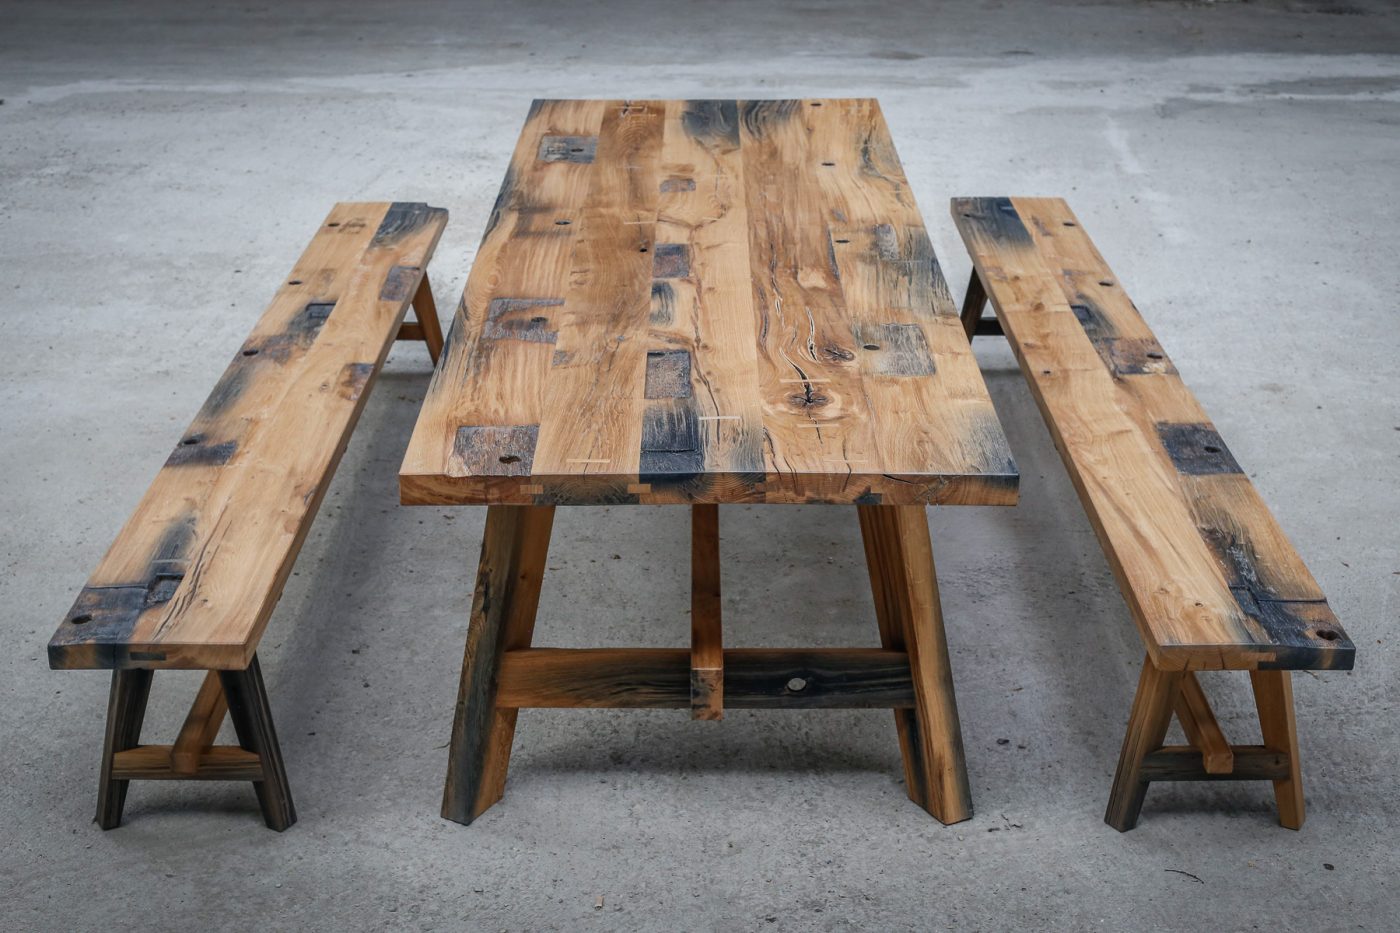 Jan Hendzel Studio black canal gate oak table and benches